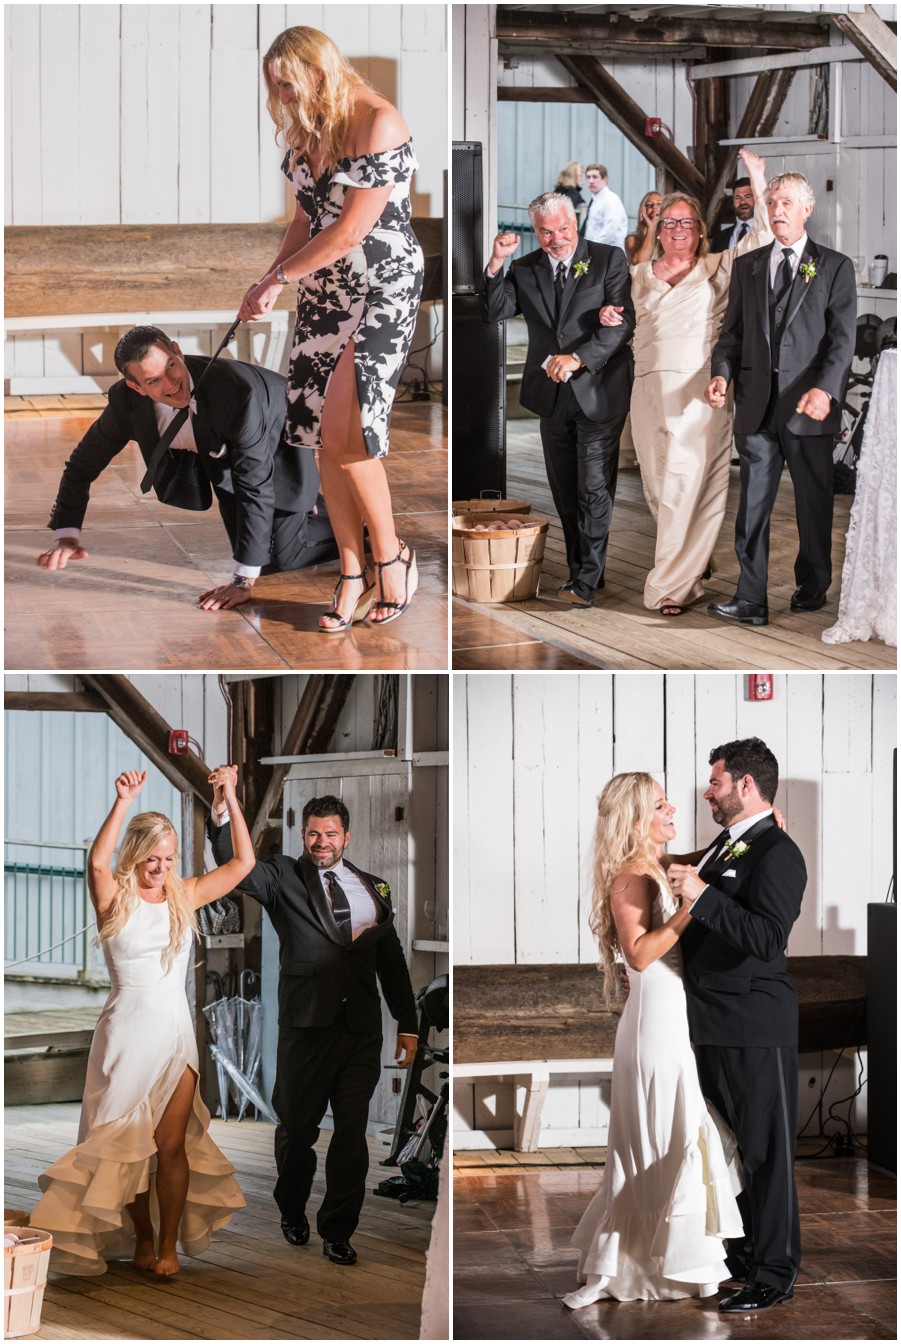 Eastern Shore Wedding wedding reception entrance by bride and groom and wedding party at the Chesapeake Bay Maritime Museum by Melissa Grimes-Guy